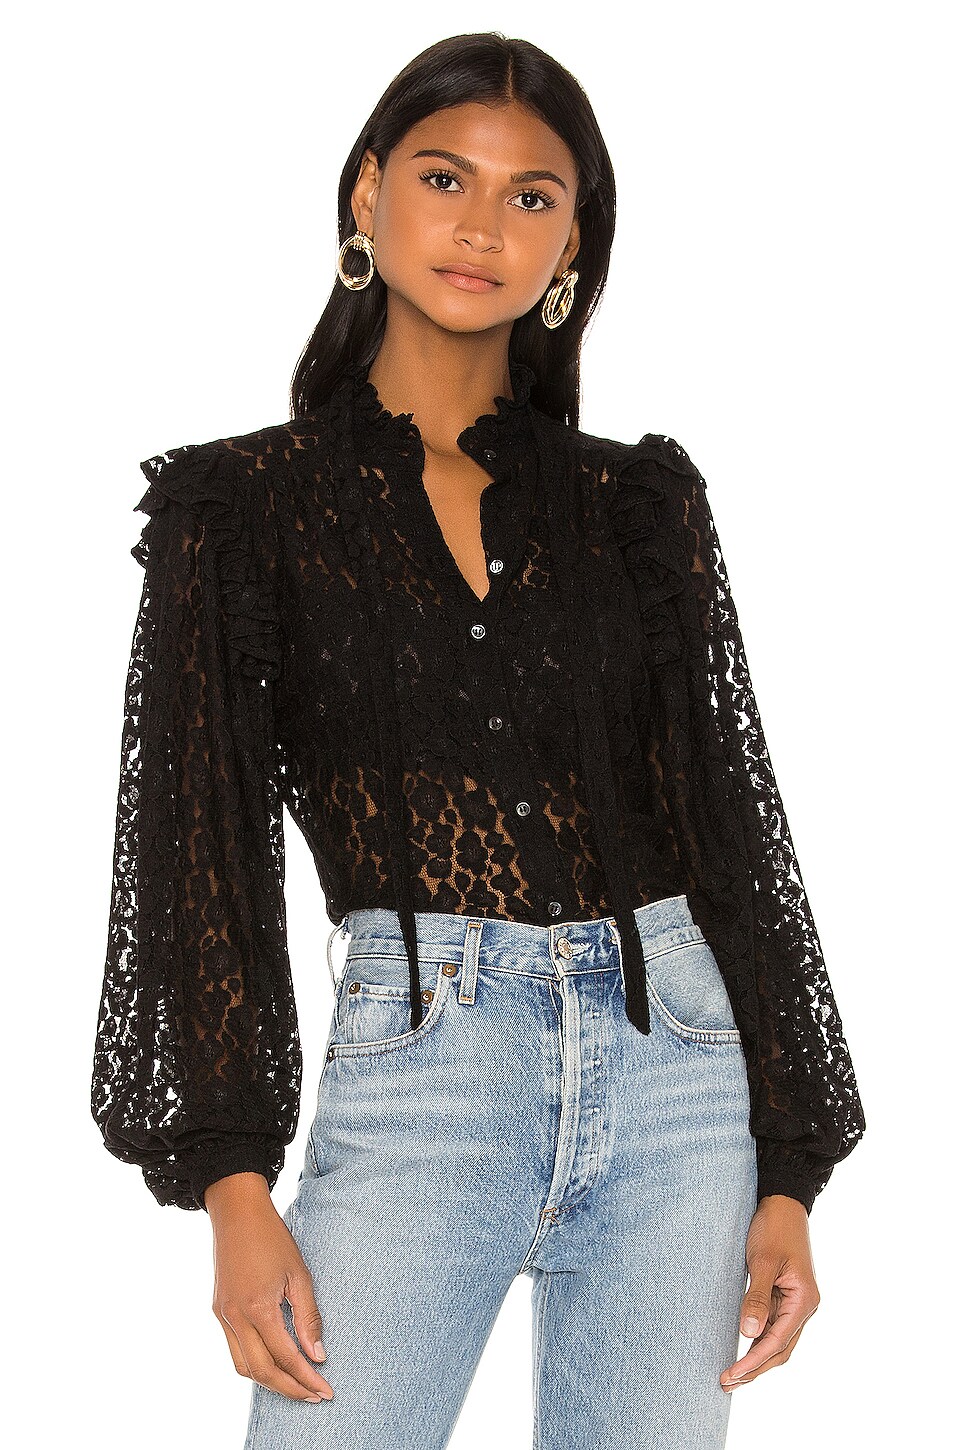 ICONS Objects of Devotion Secretary Blouse in Black Lace | REVOLVE